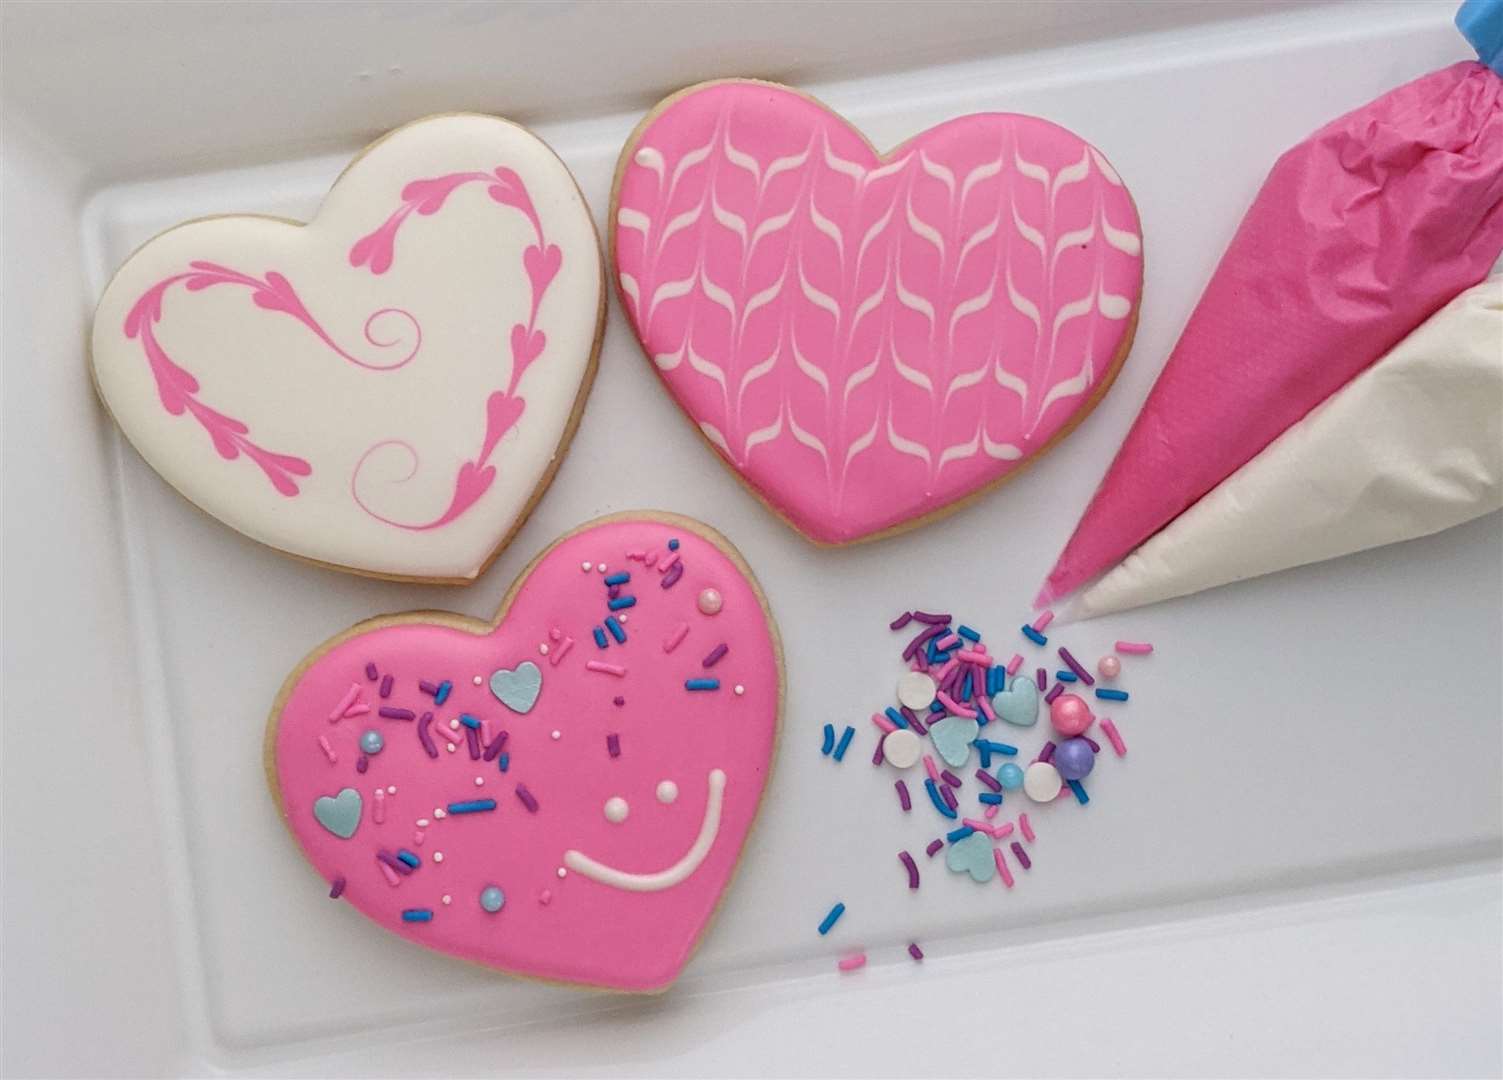 Spread the love with Valentine's Day biscuits. Picture: Macknade